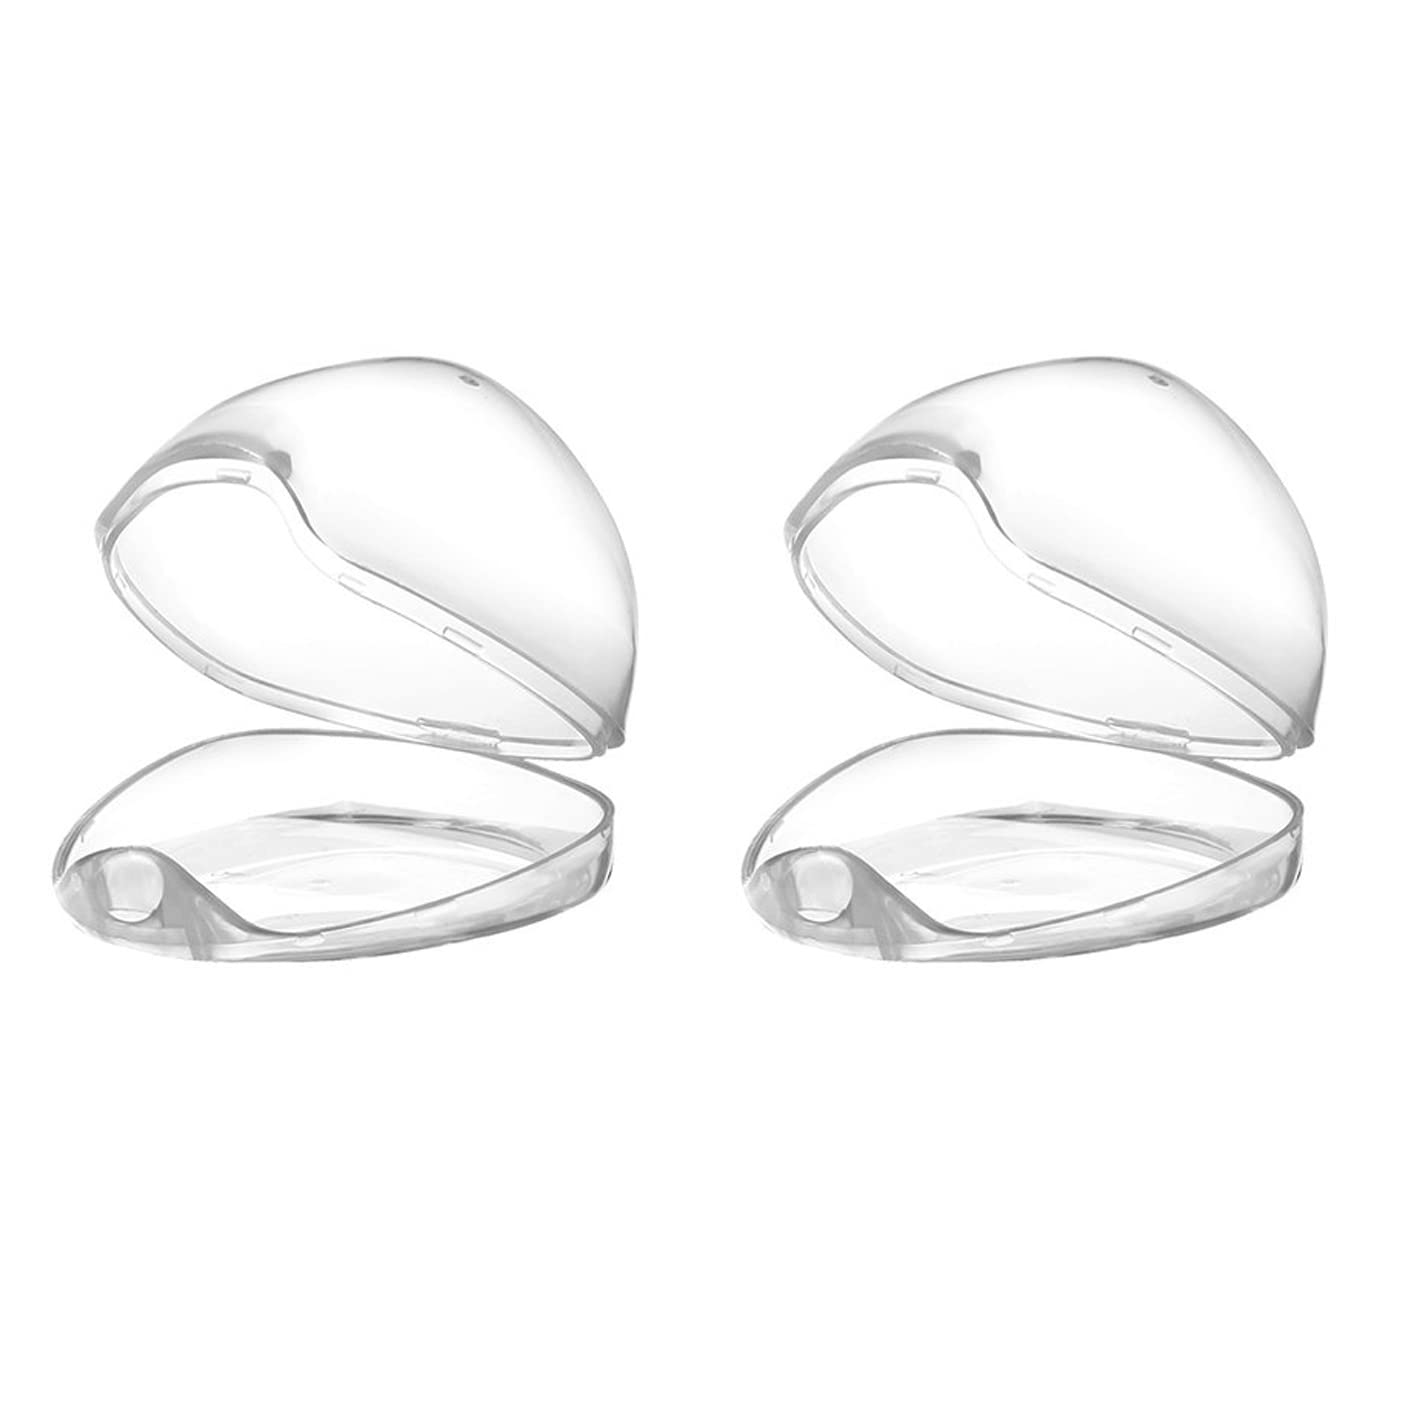 Dummy Case 2Pcs Transparent Pacifier Case Pacifier Holder Box BPA-Free Nipple Shield Case for Travel and Home